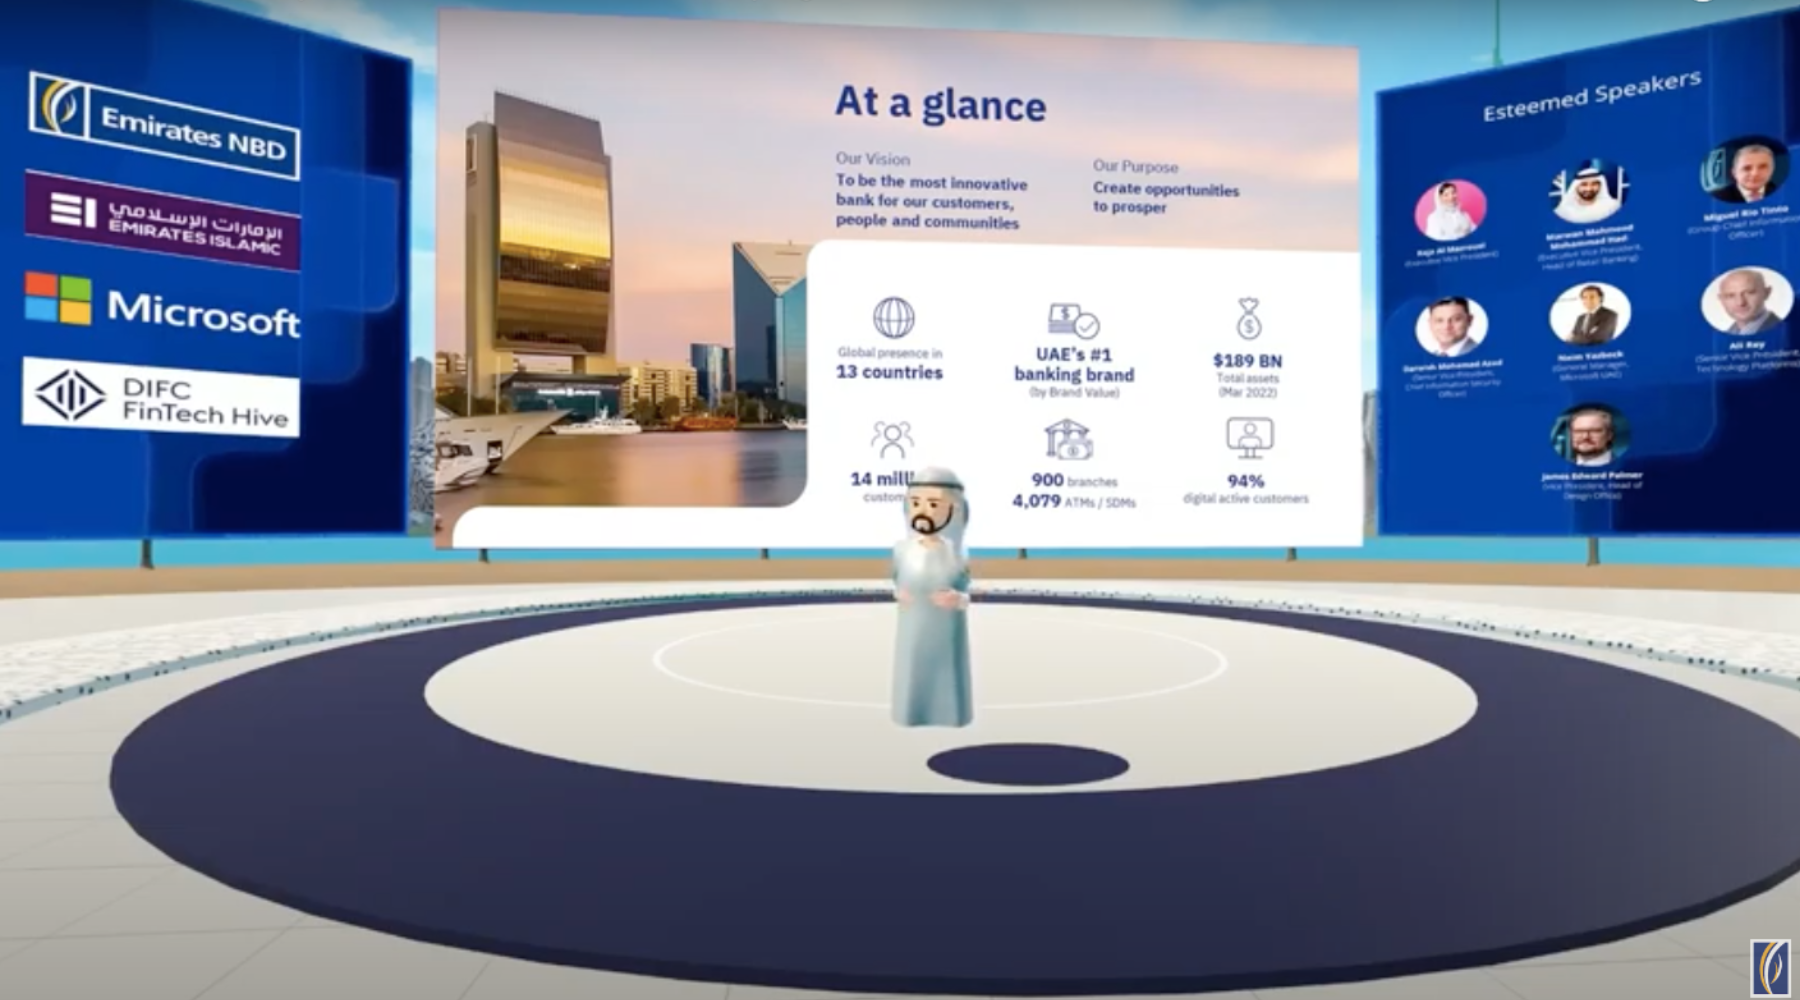 Emirates NBD Launches Global call for Metaverse Start-ups